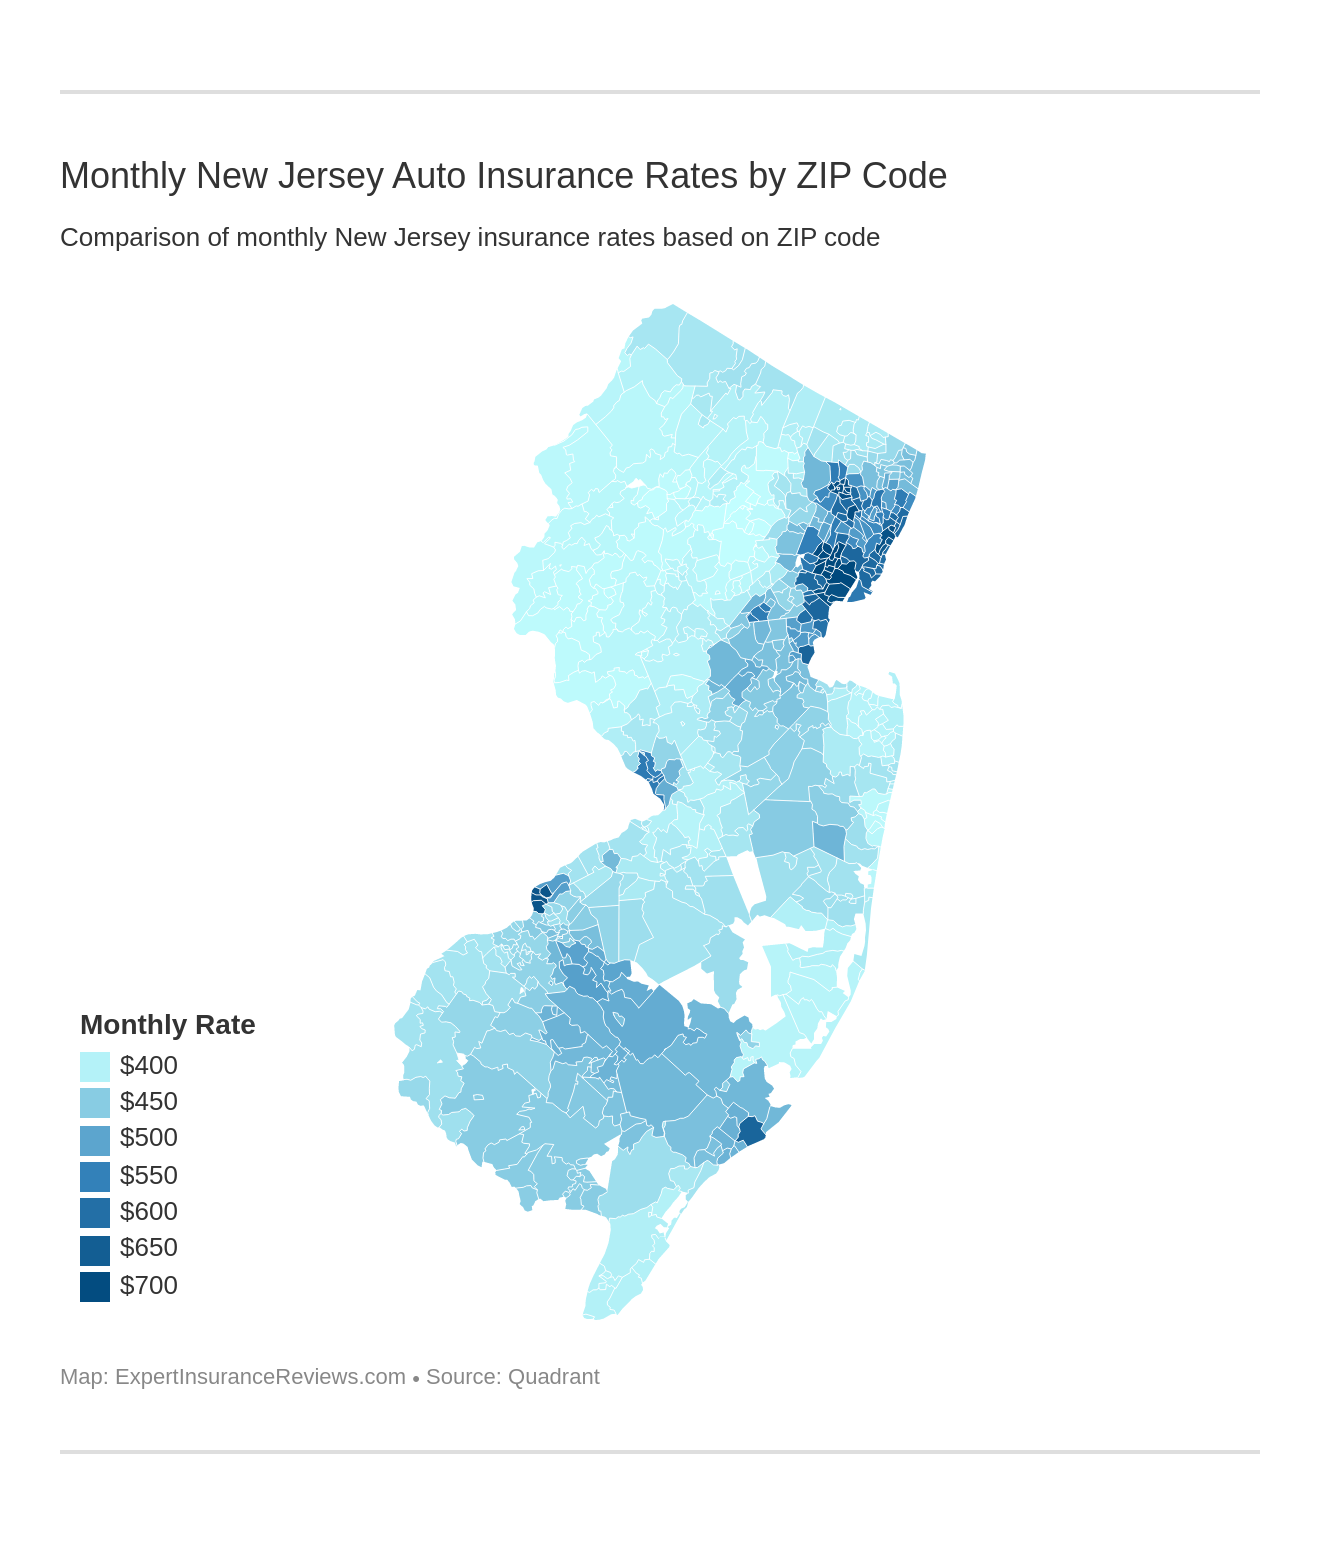 Monthly New Jersey Auto Insurance Rates by ZIP Code